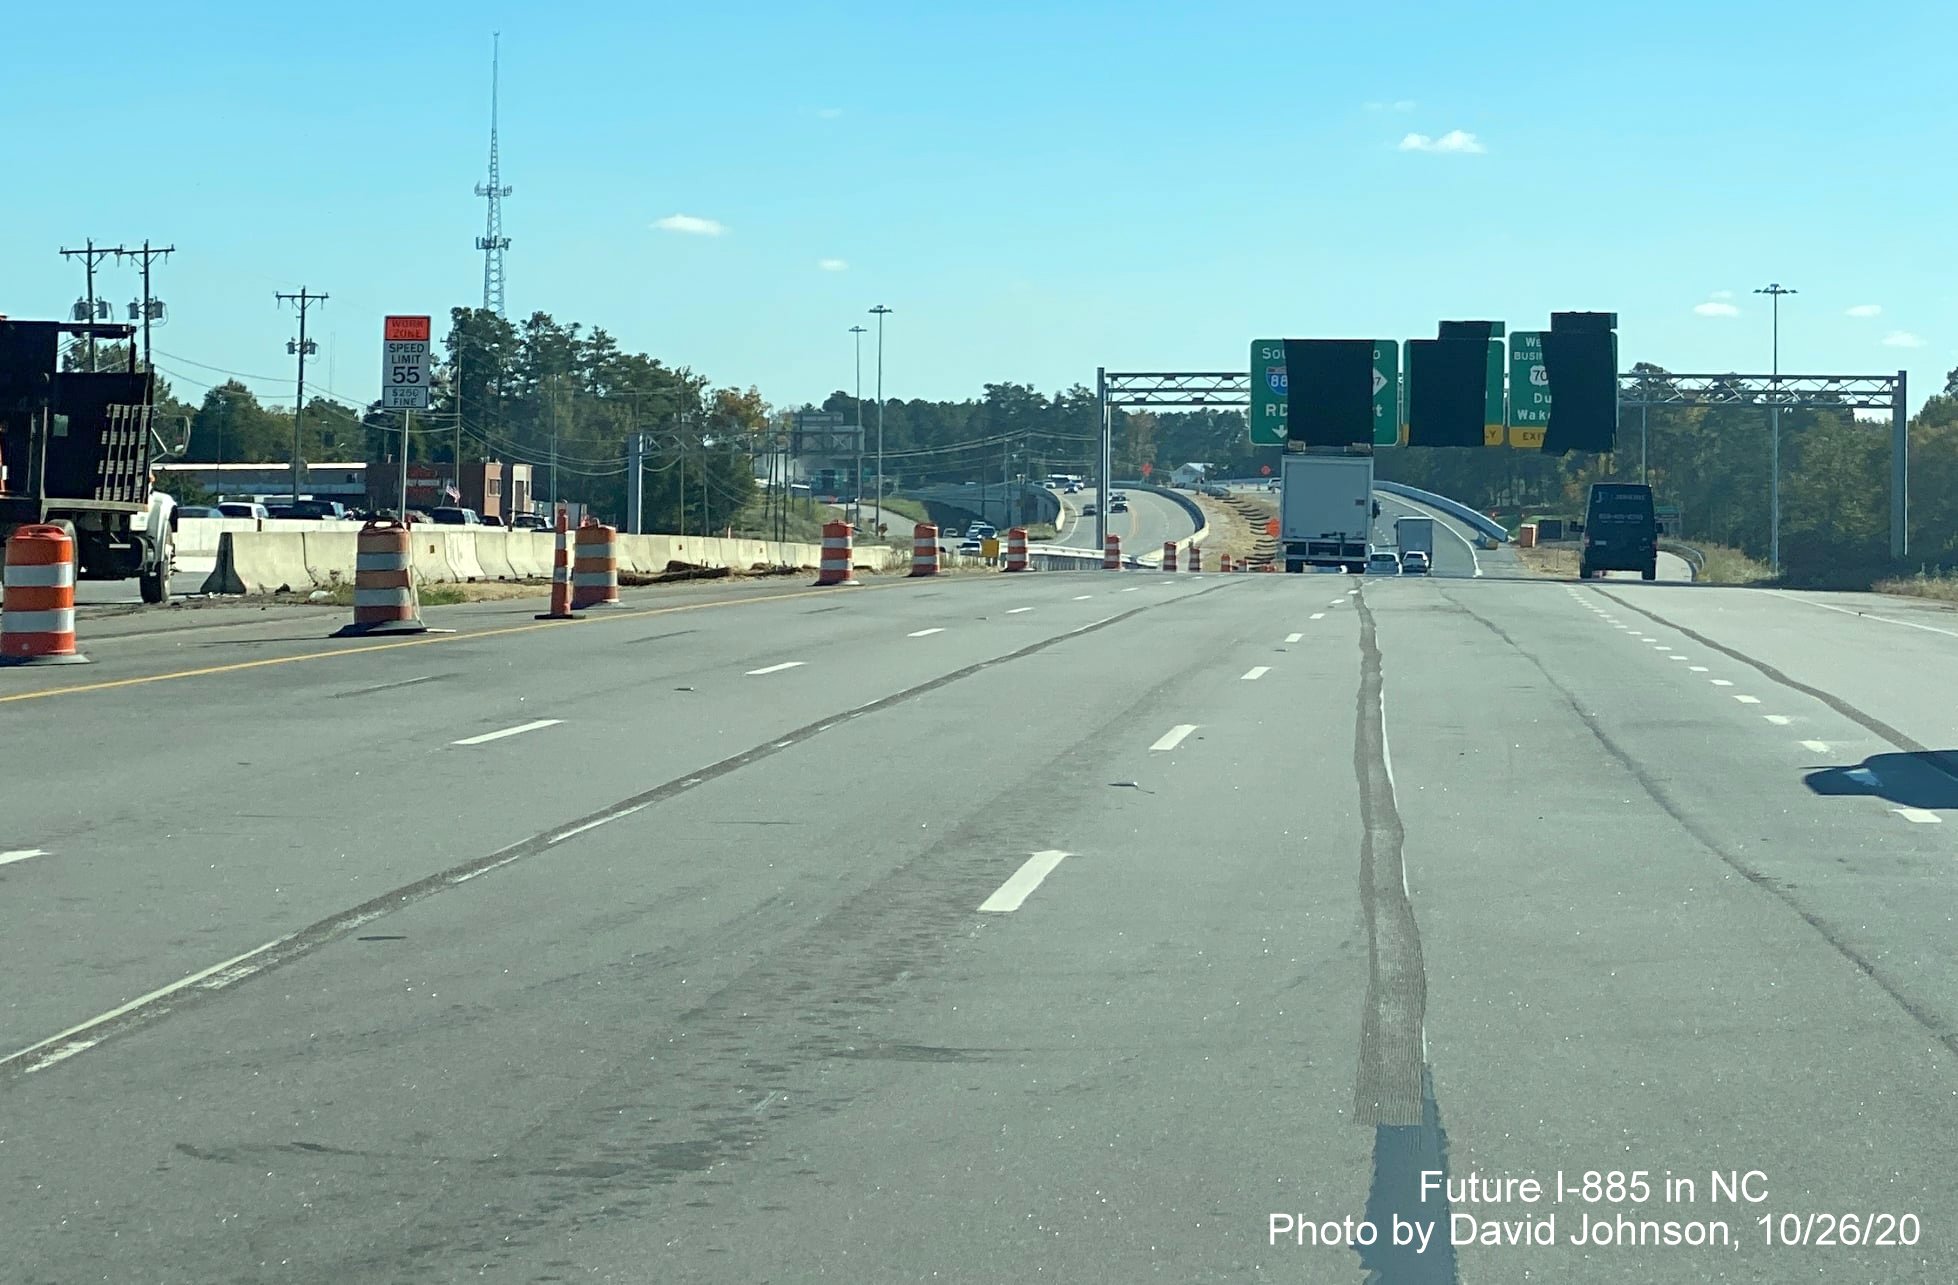 Image of traffic along new section of US 70 East (Future I-885 South) lanes in Durham prior to Business 70/NC 98 exit, by David Johnson October 2020